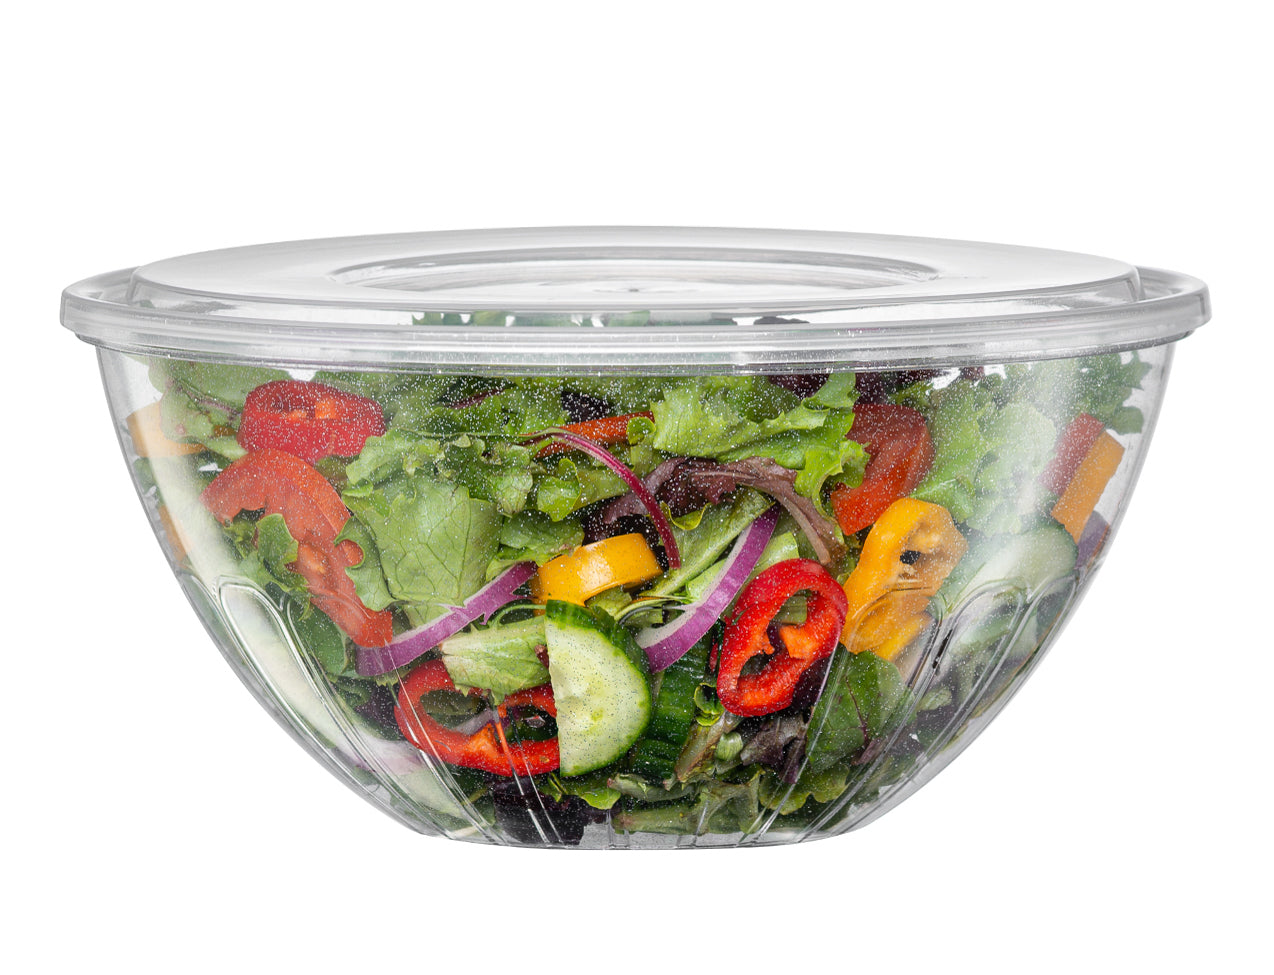 Silver Glitter Salad Bowl With Lids - 3 Count – Posh Setting